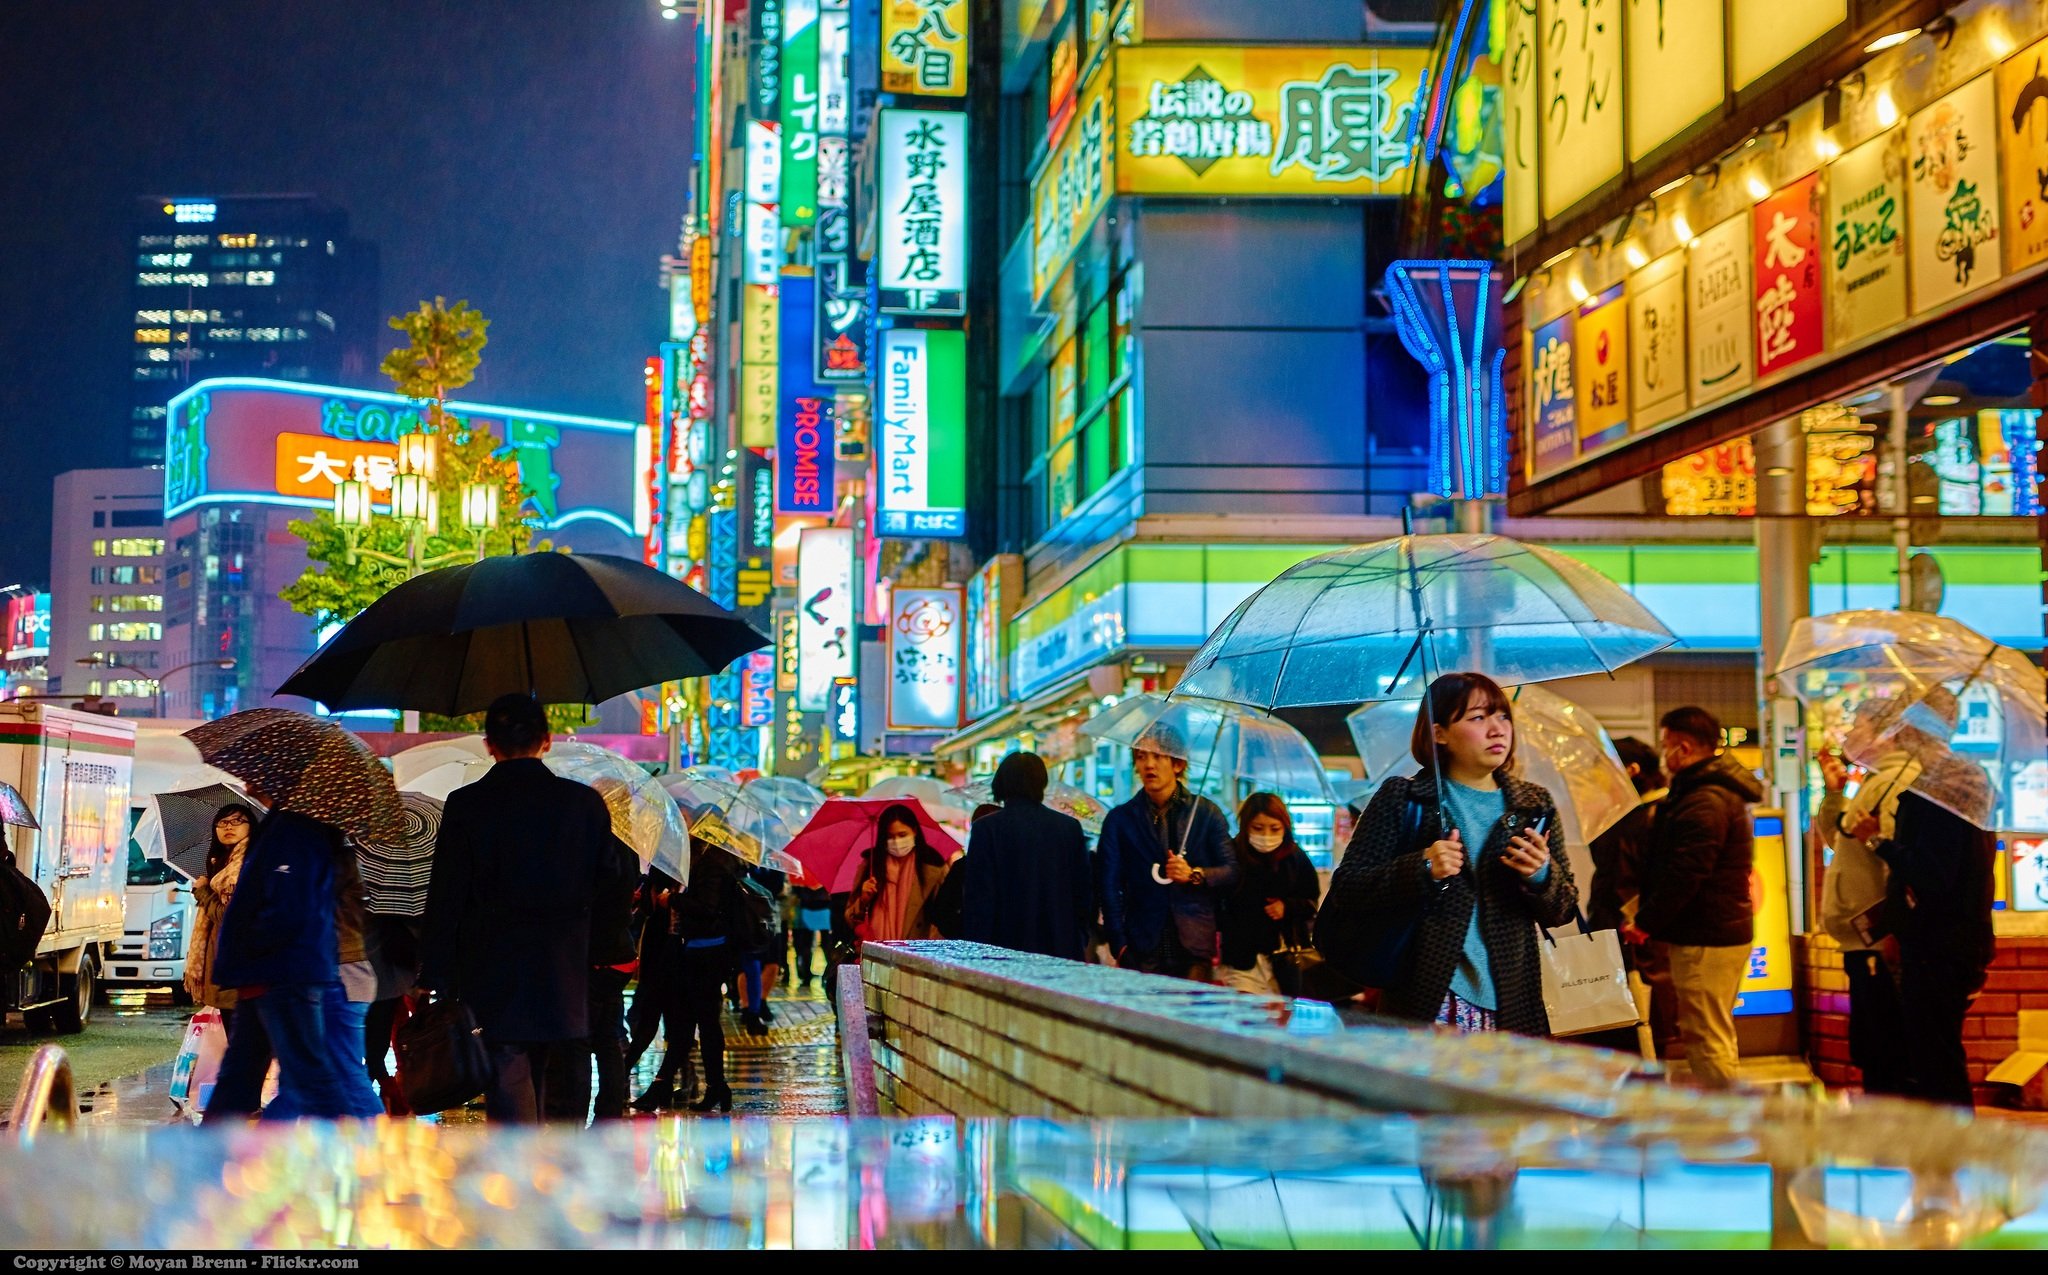 10 Things About Life In Japan You Probably Don’t Know